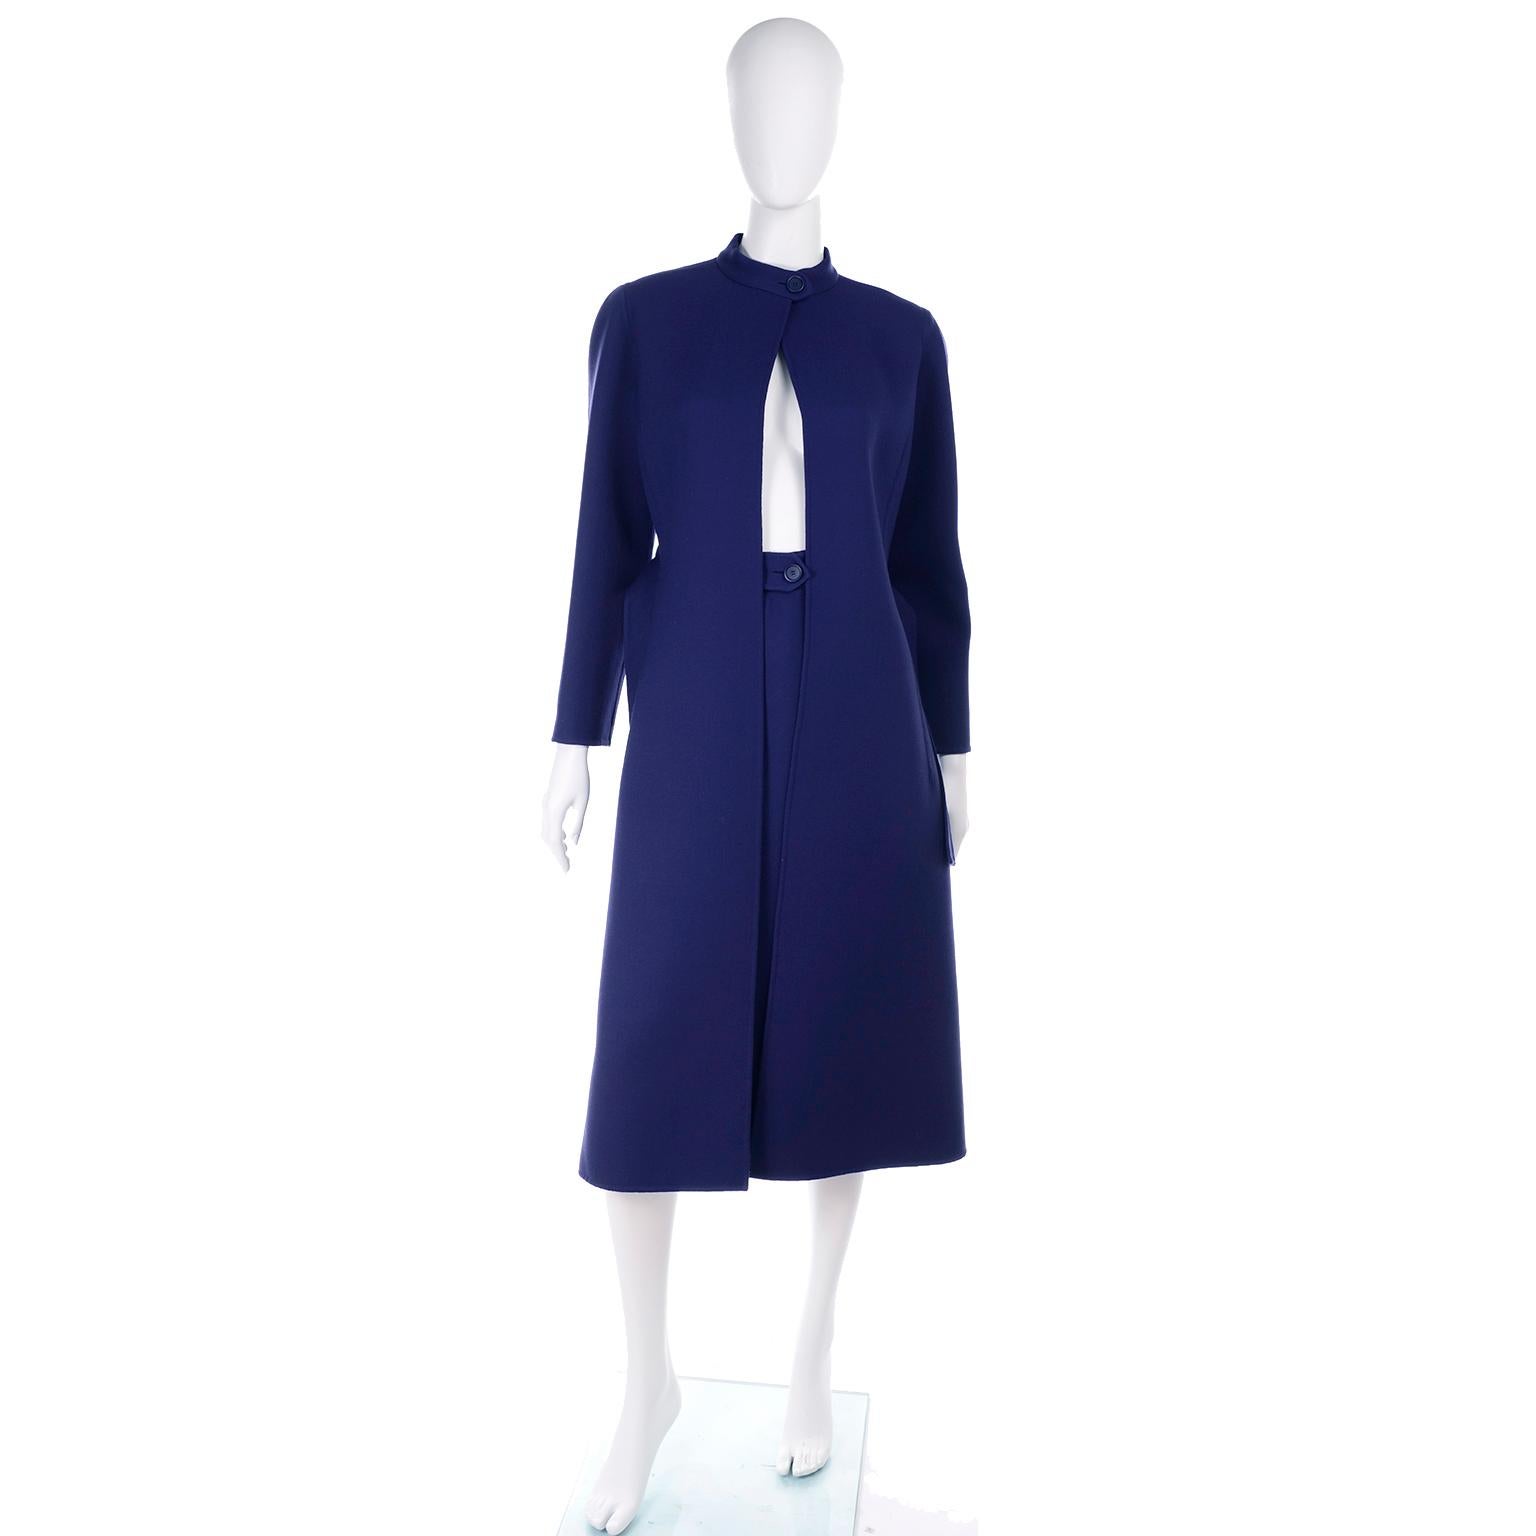 This is an outstanding Spring of 1976 coat and skirt ensemble from Geoffrey Beene that we acquired from an estate we were fortunate to handle. The original owner was a California judge who had an impeccable wardrobe of unique designer pieces. This